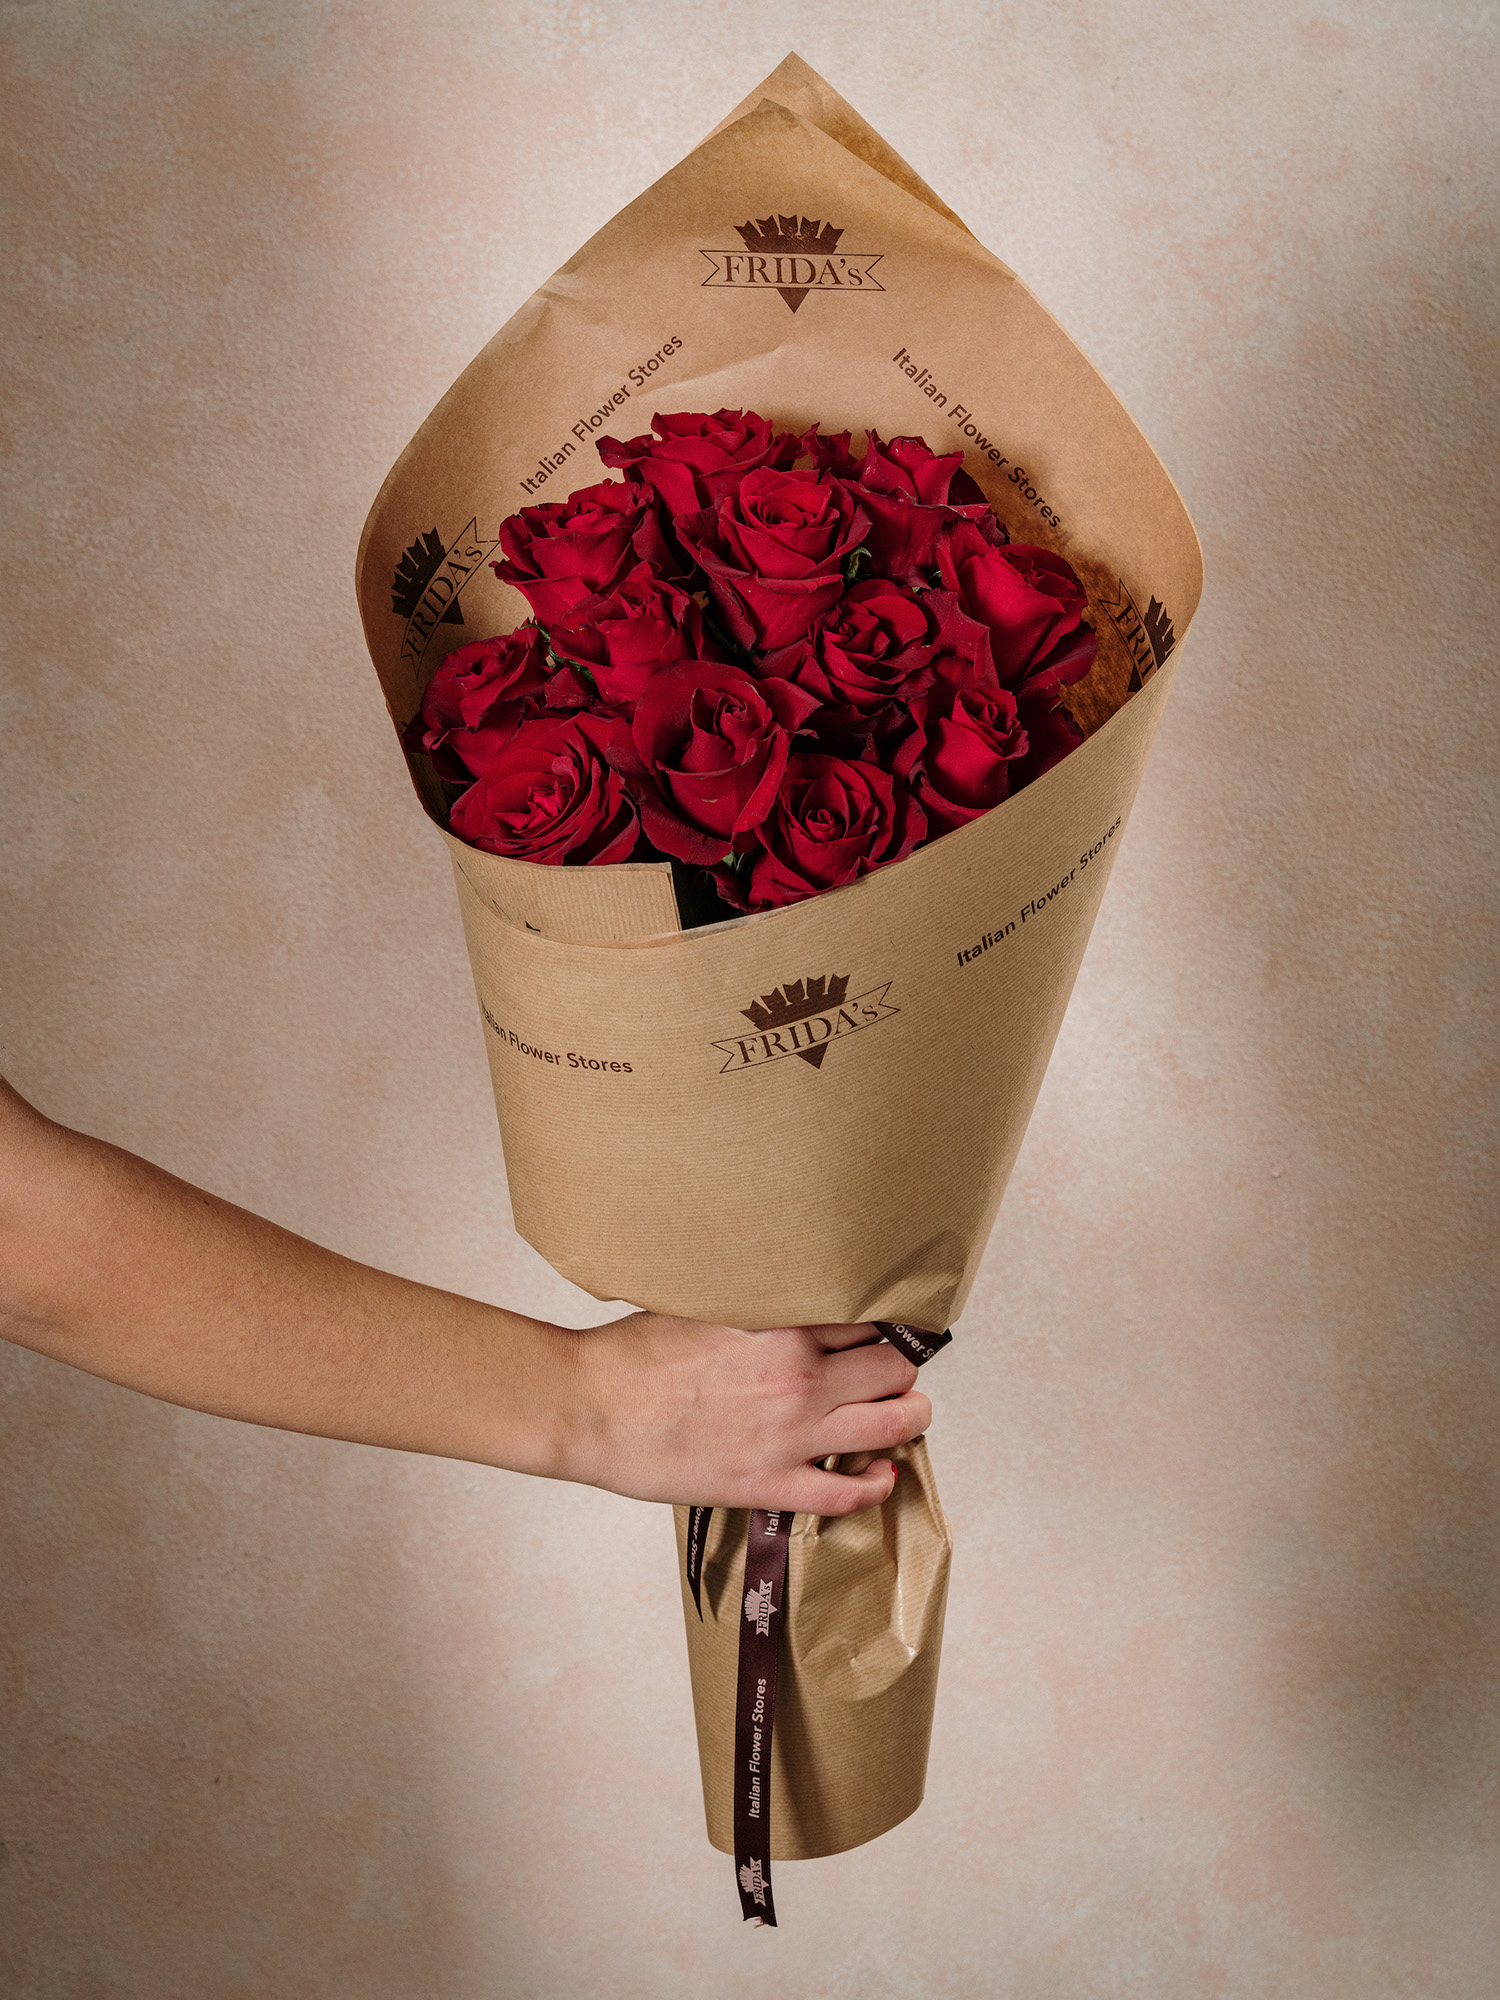 Red Rose Bouquet - From 5 to 15 red roses - Frida's